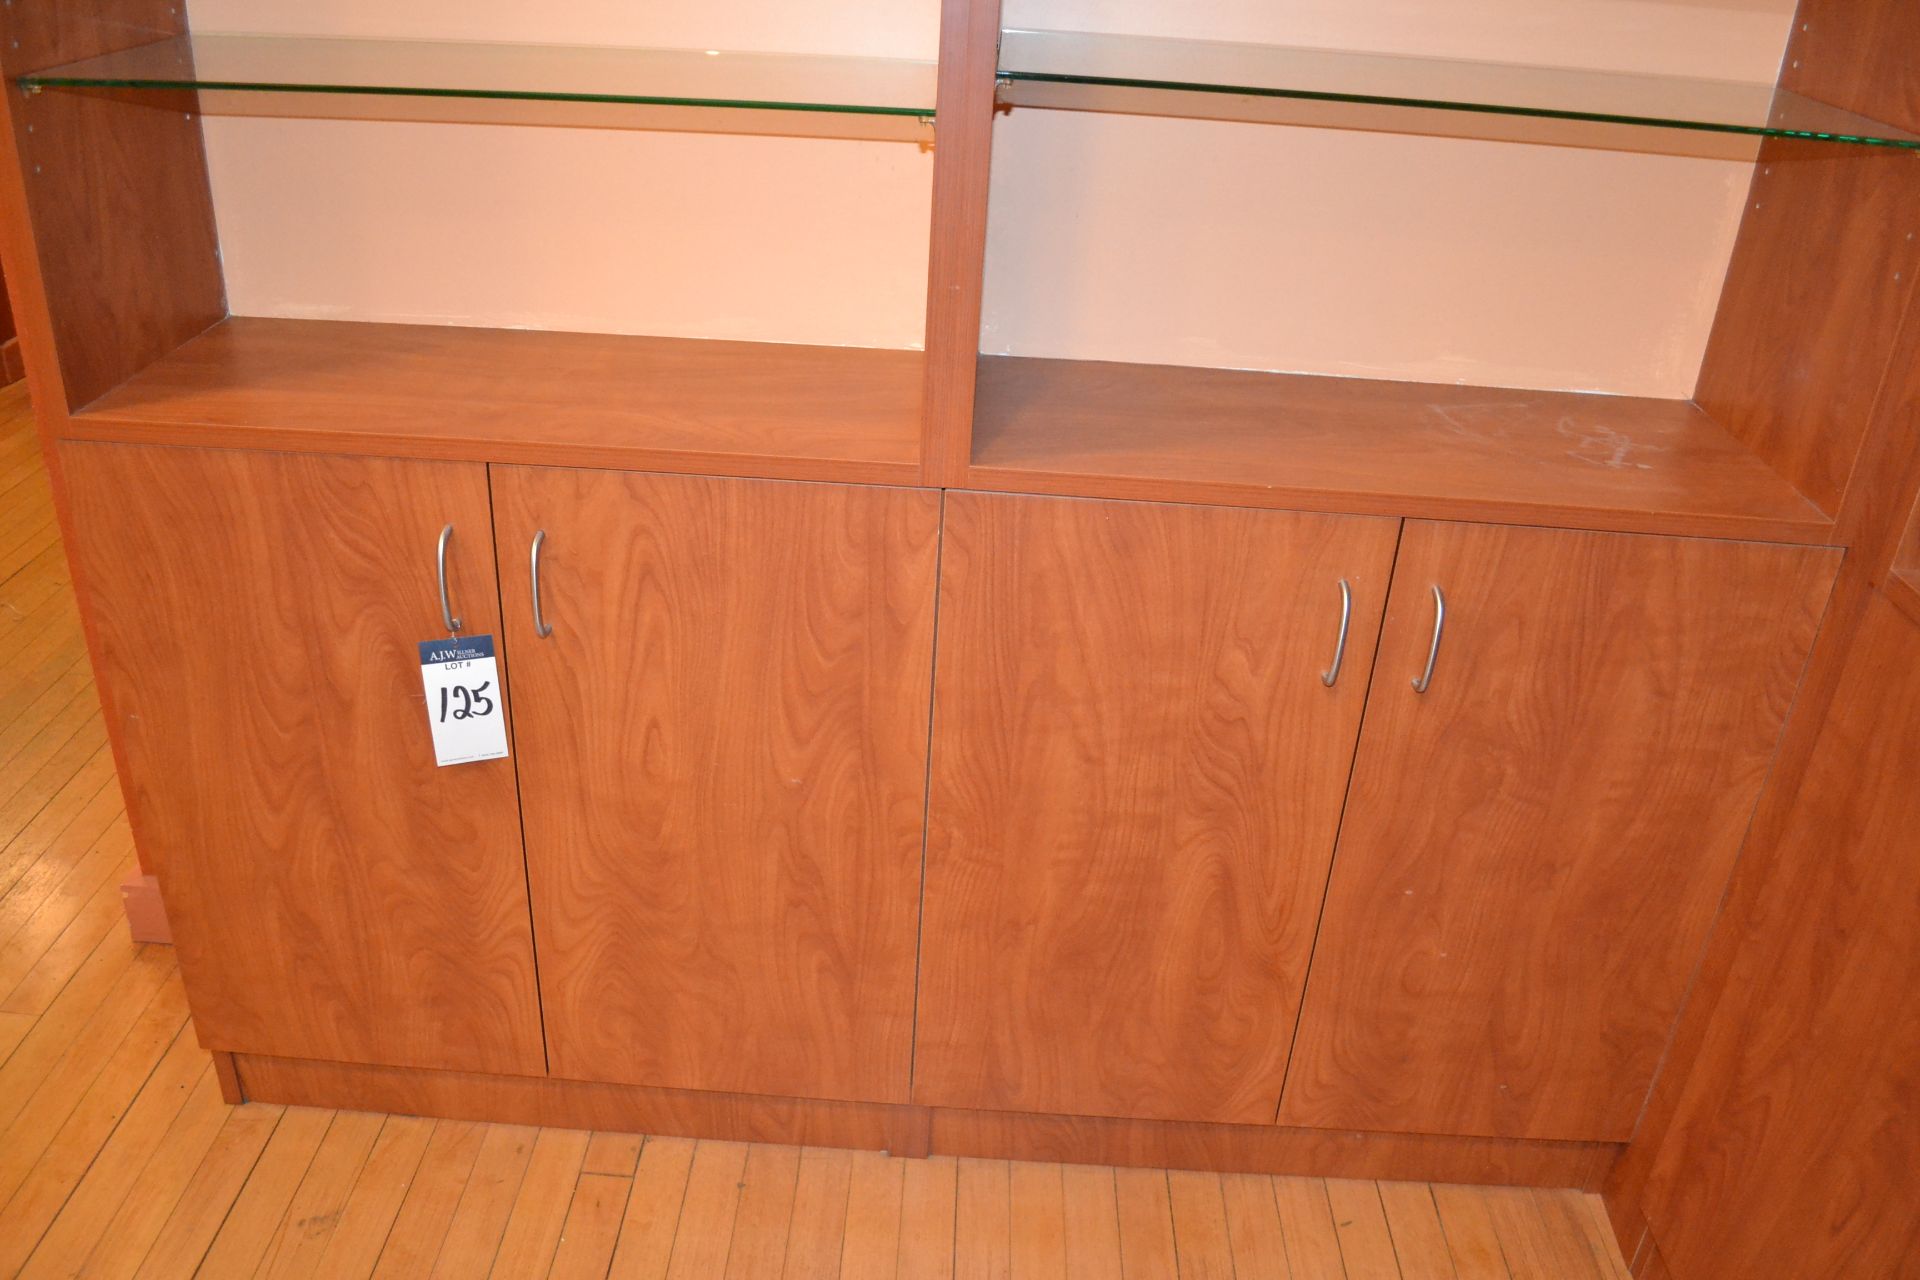 Cherry Formica Corner Shelving w/ Bottom Cabinets - Image 6 of 6